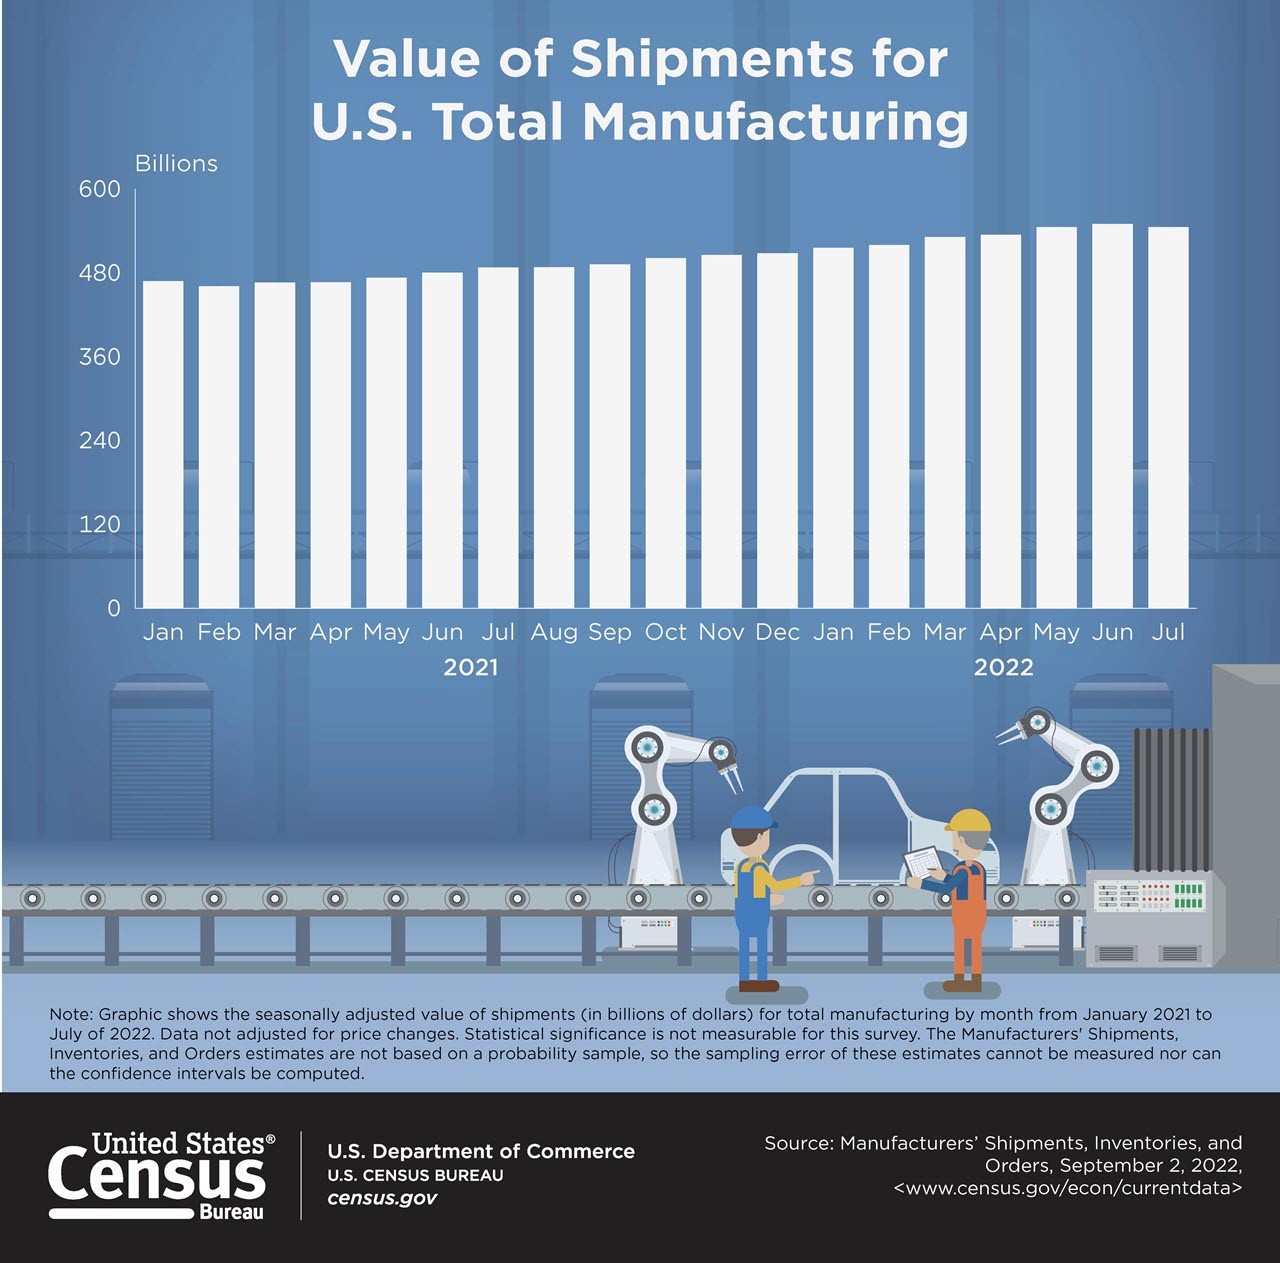 Value of Shipments for U.S. Total Manufacturing